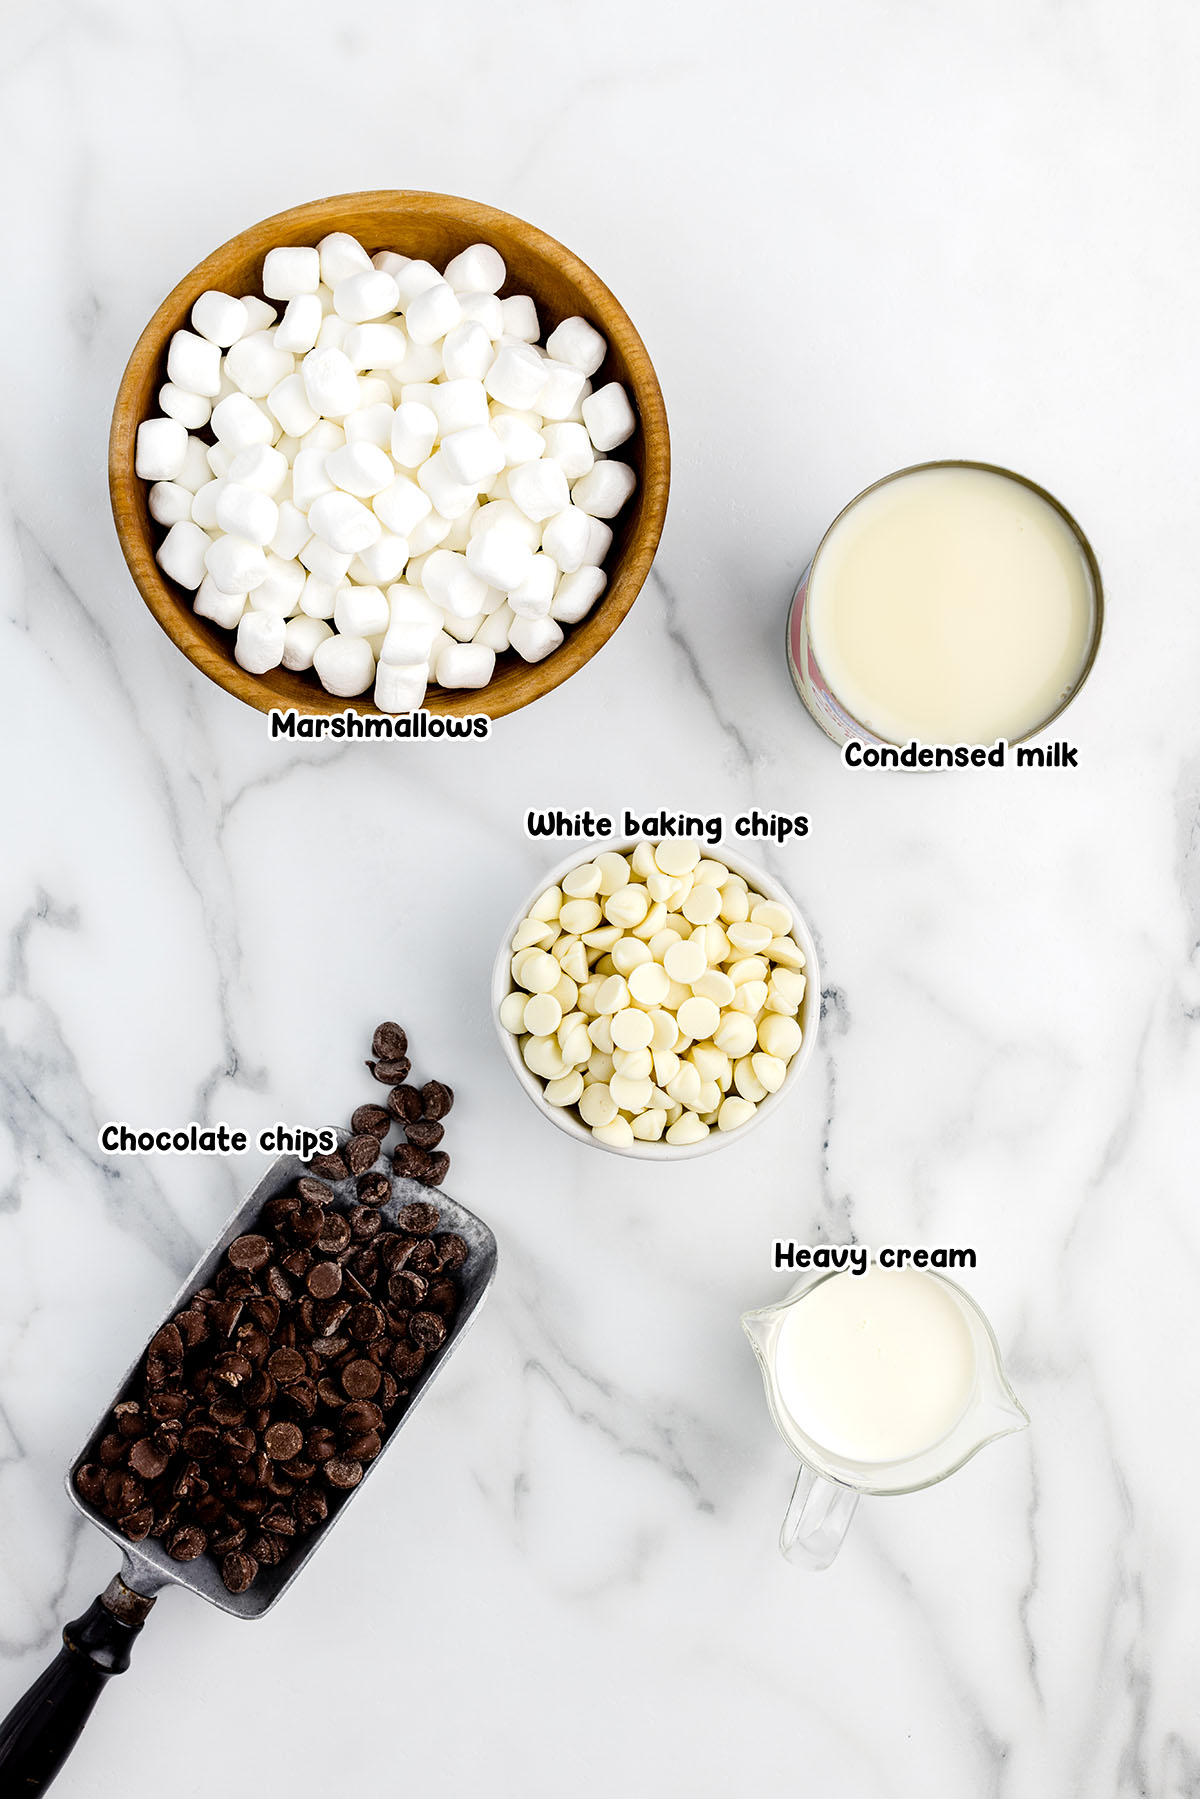 Hot Chocolate Fudge ingredients - marshmallows, condensed milk, white baking chips, chocolate chips and heavy cream.